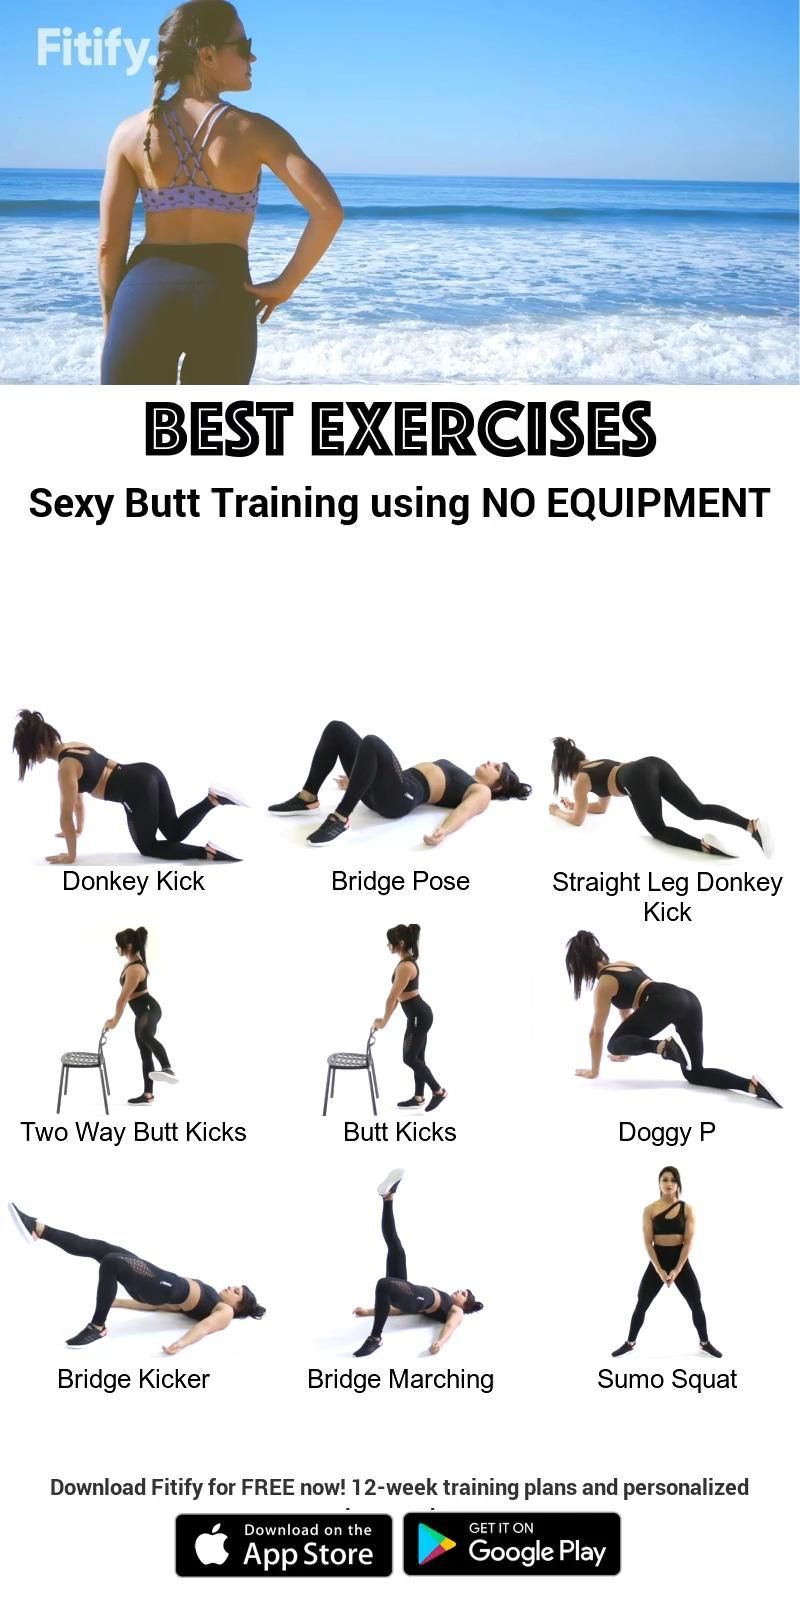 workouts give perfect butt, Don't miss 7 workouts. - workouts give perfect butt, Don't miss 7 workouts. -   13 workouts for bigger but at home ideas